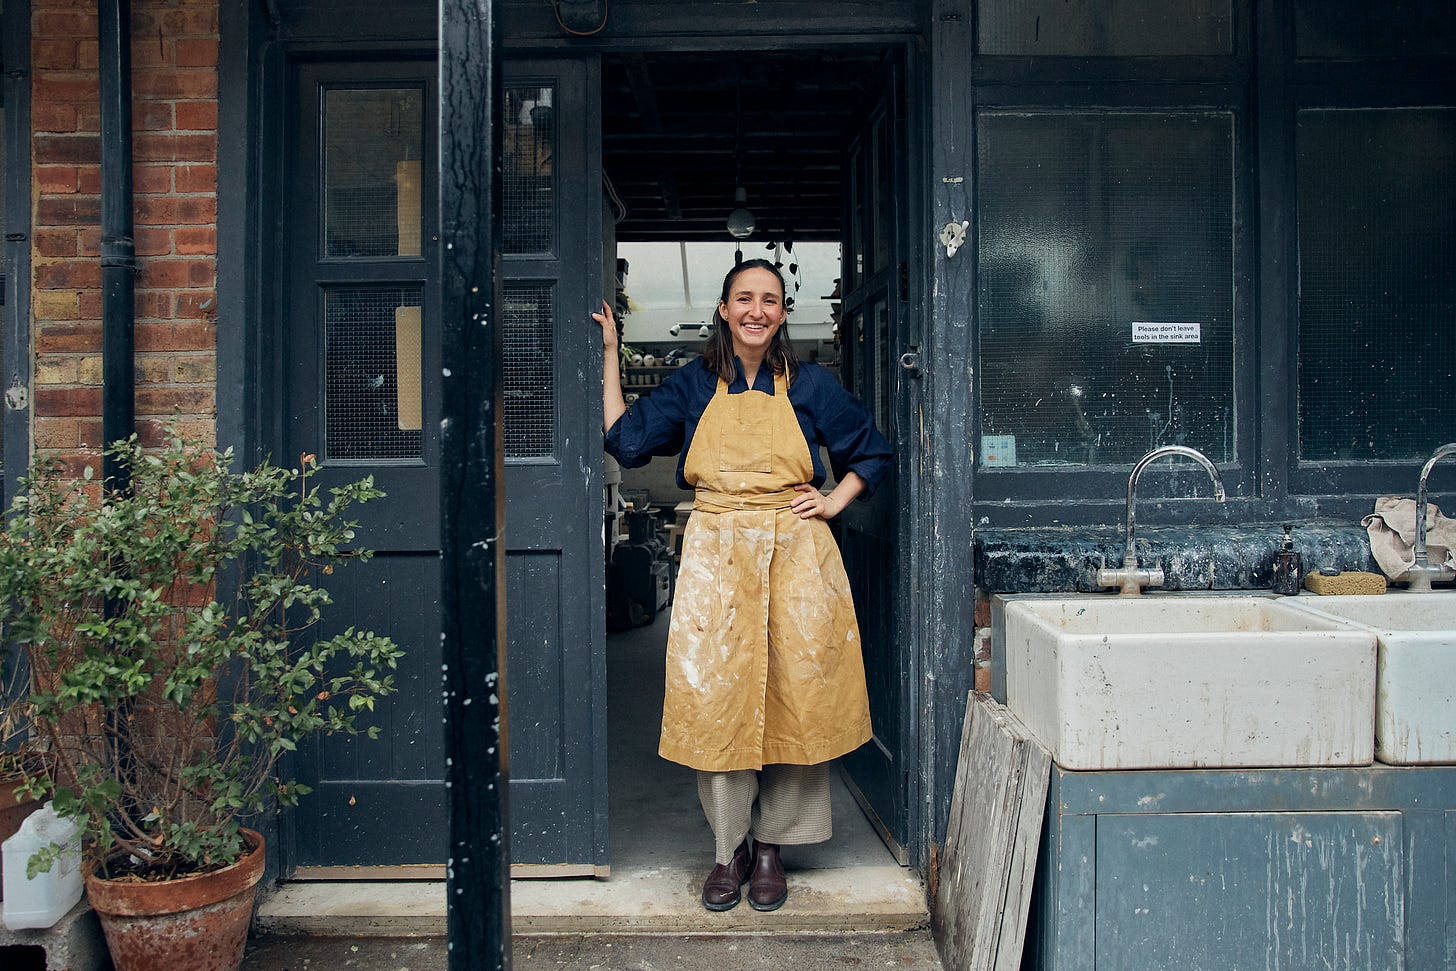 A smiling woman (ceramicist Lucia Ojeco) stands in a doorway in a messy apron. There is an outdoor sink to the right and a plant to the left.